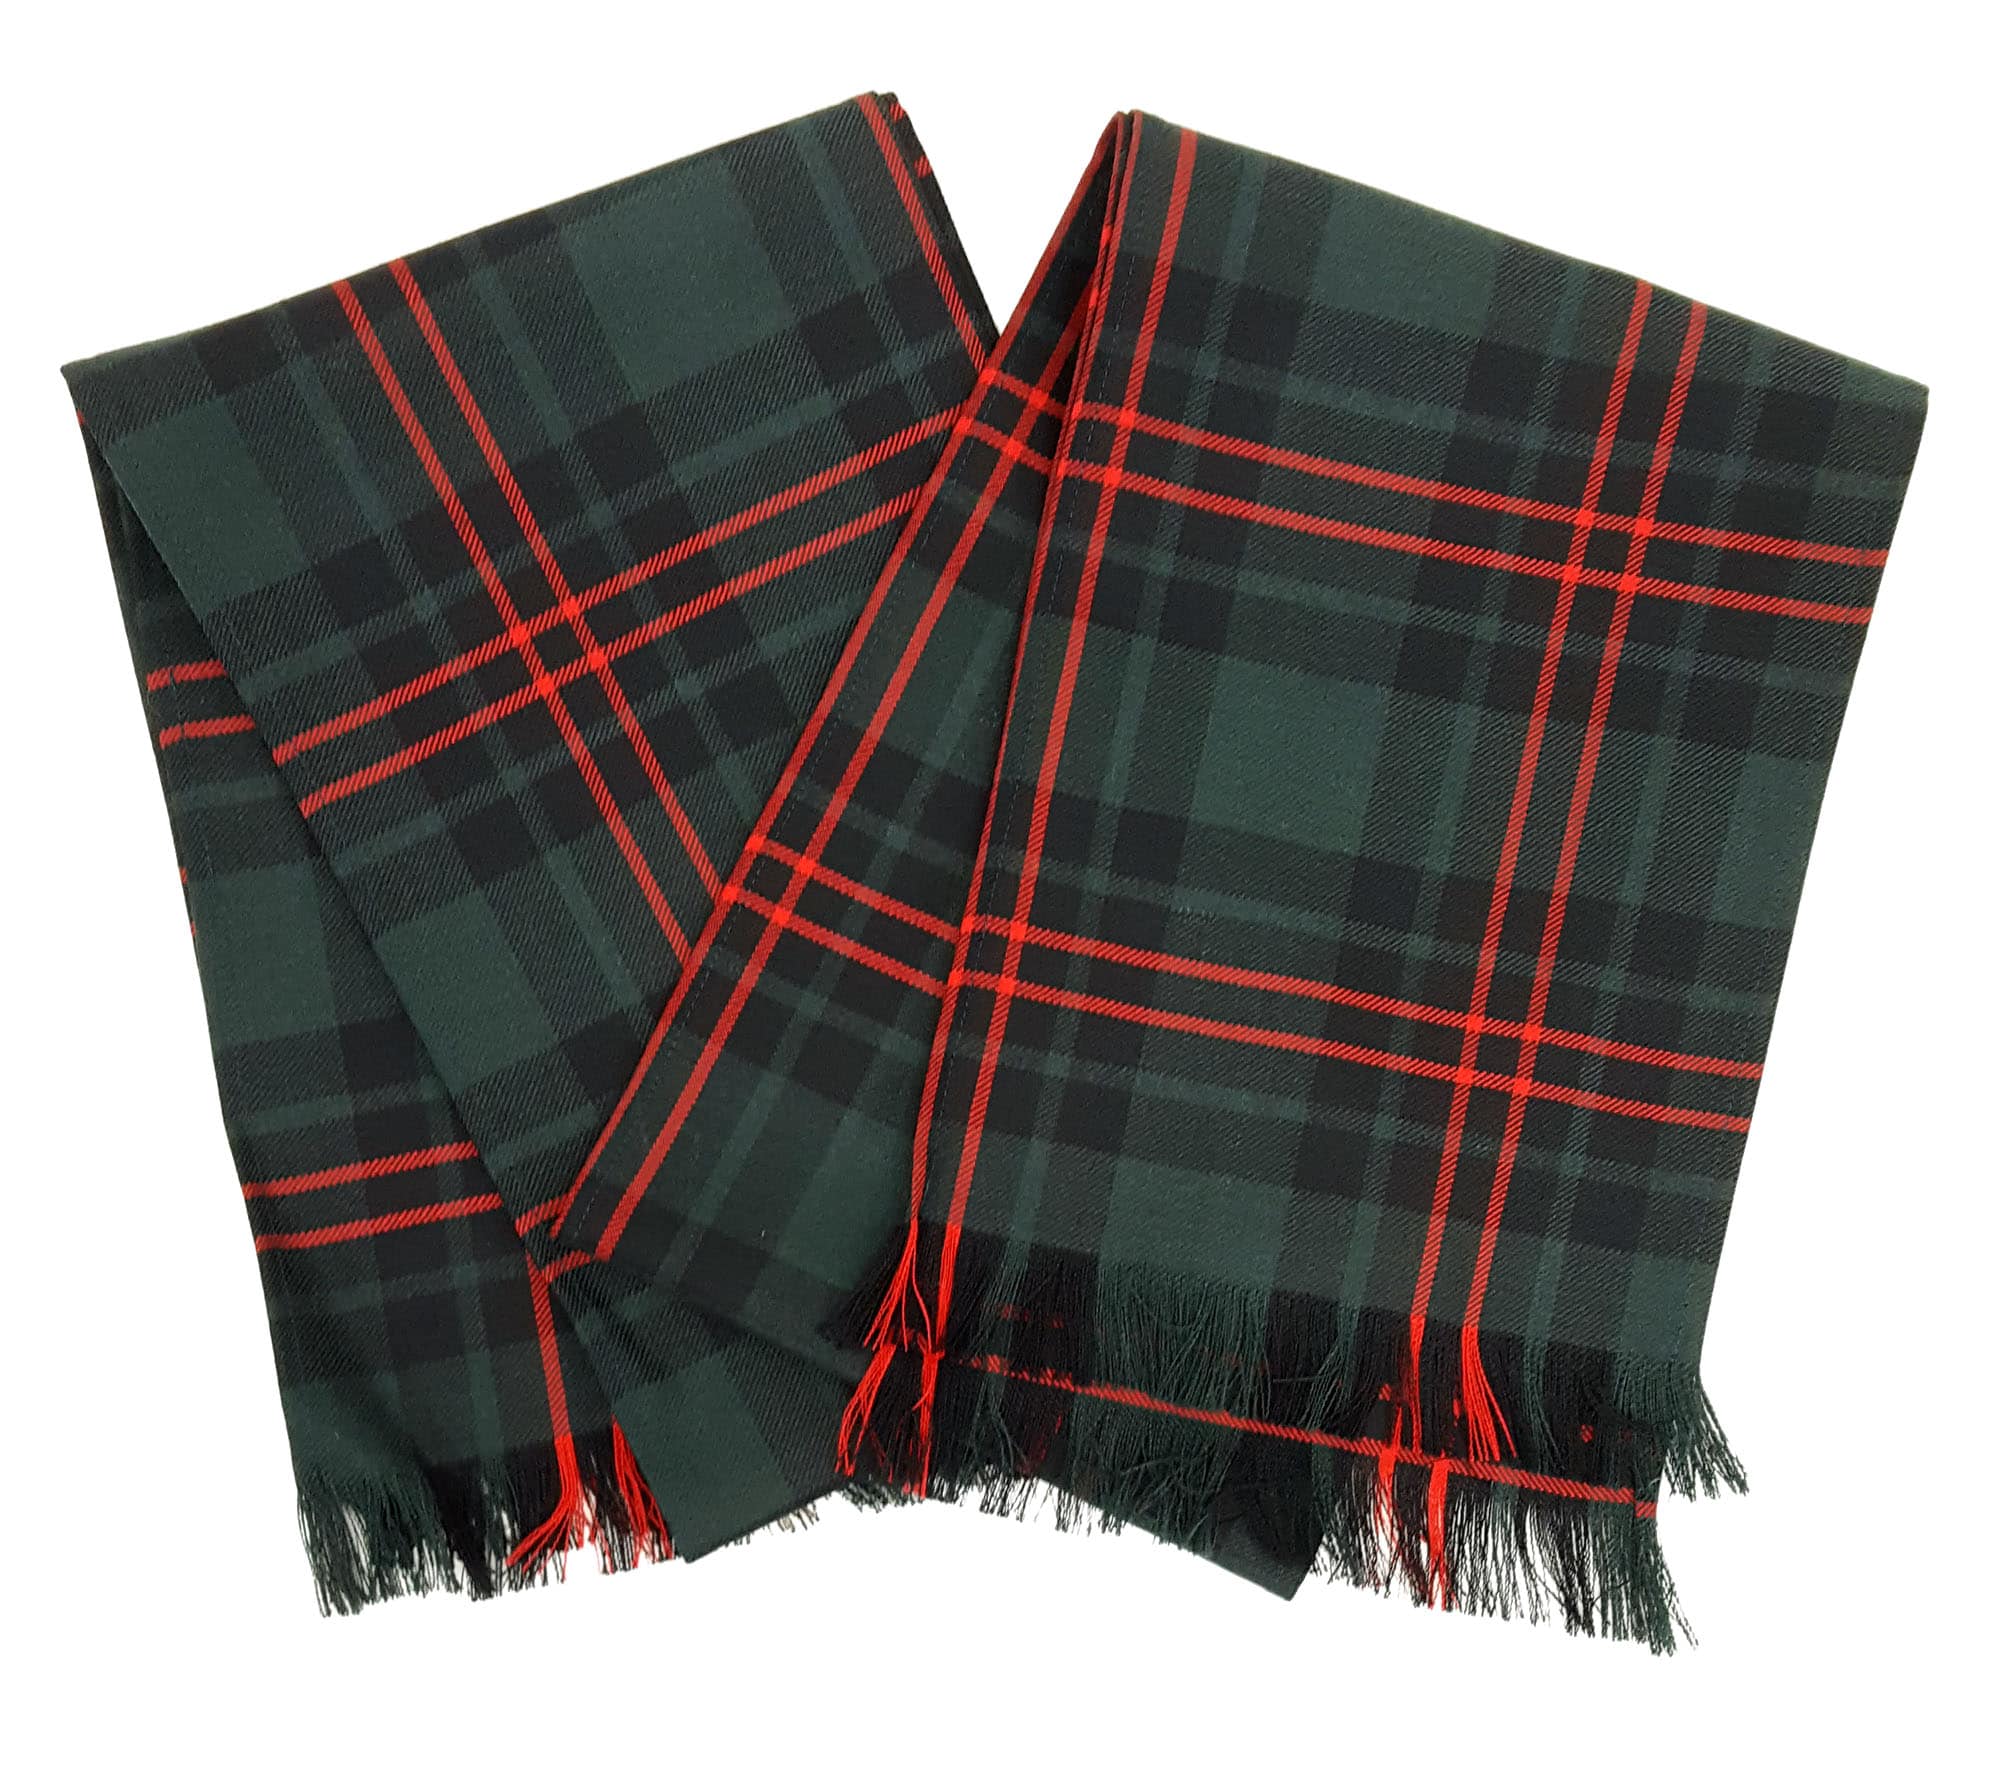 A set of two scarves in the Fife District Modern tartan